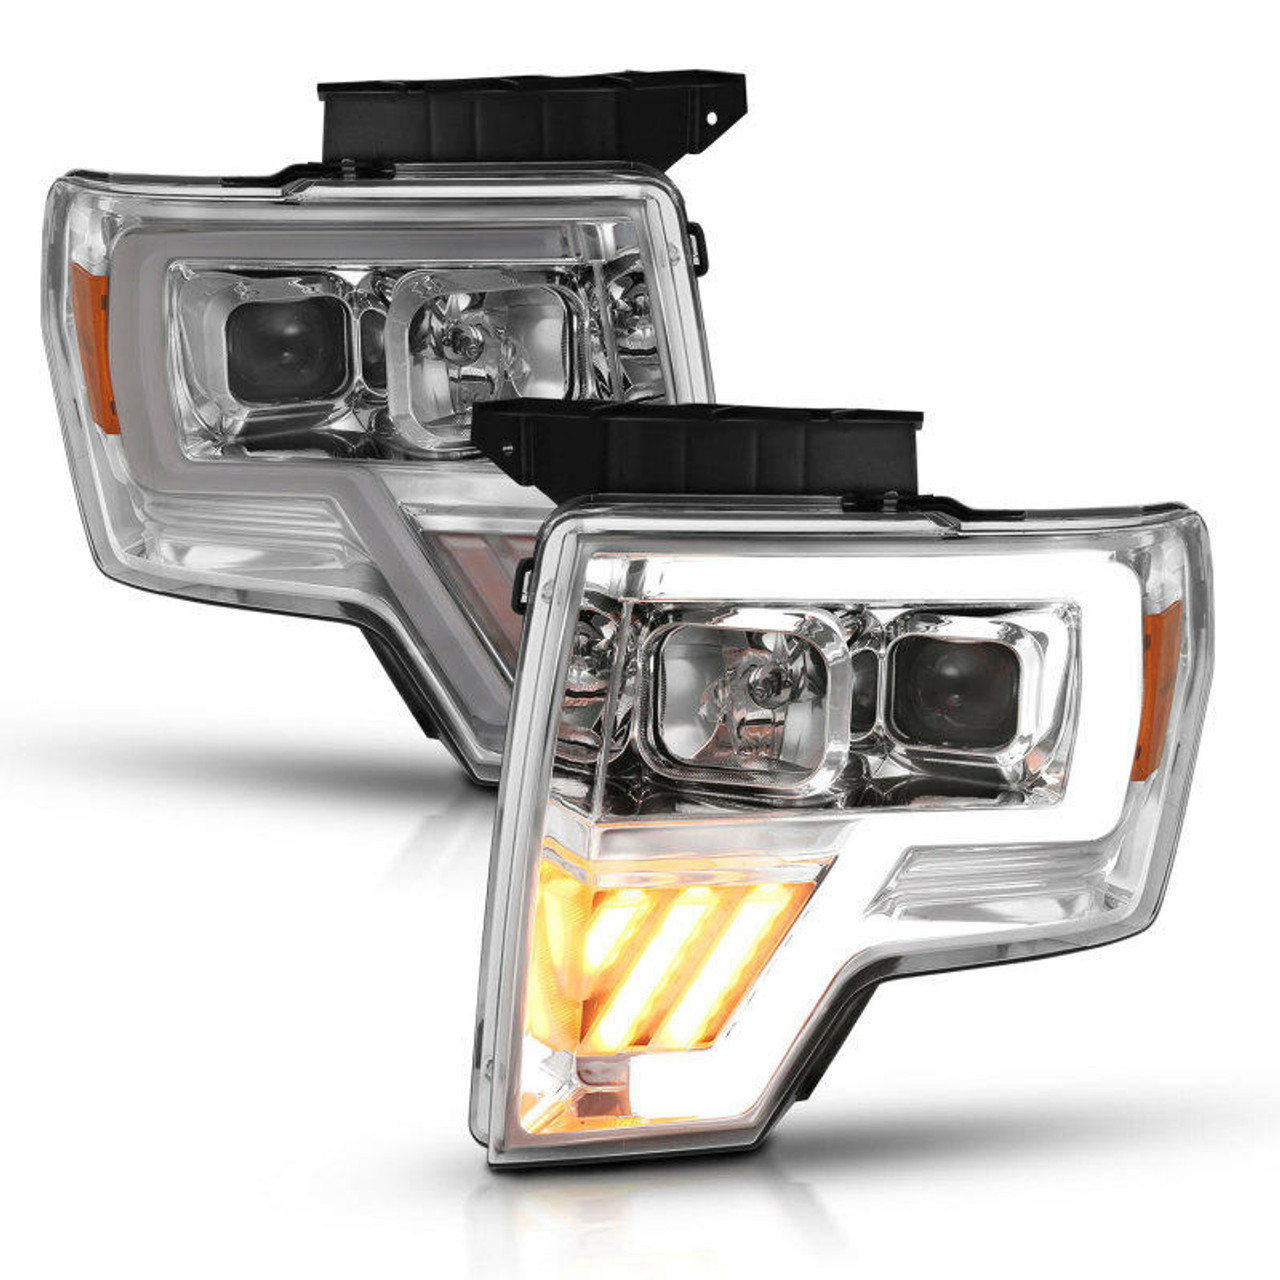 ANZO ANZO 2009-2014 Ford F-150 Projector Headlight Chrome Amber - 111446